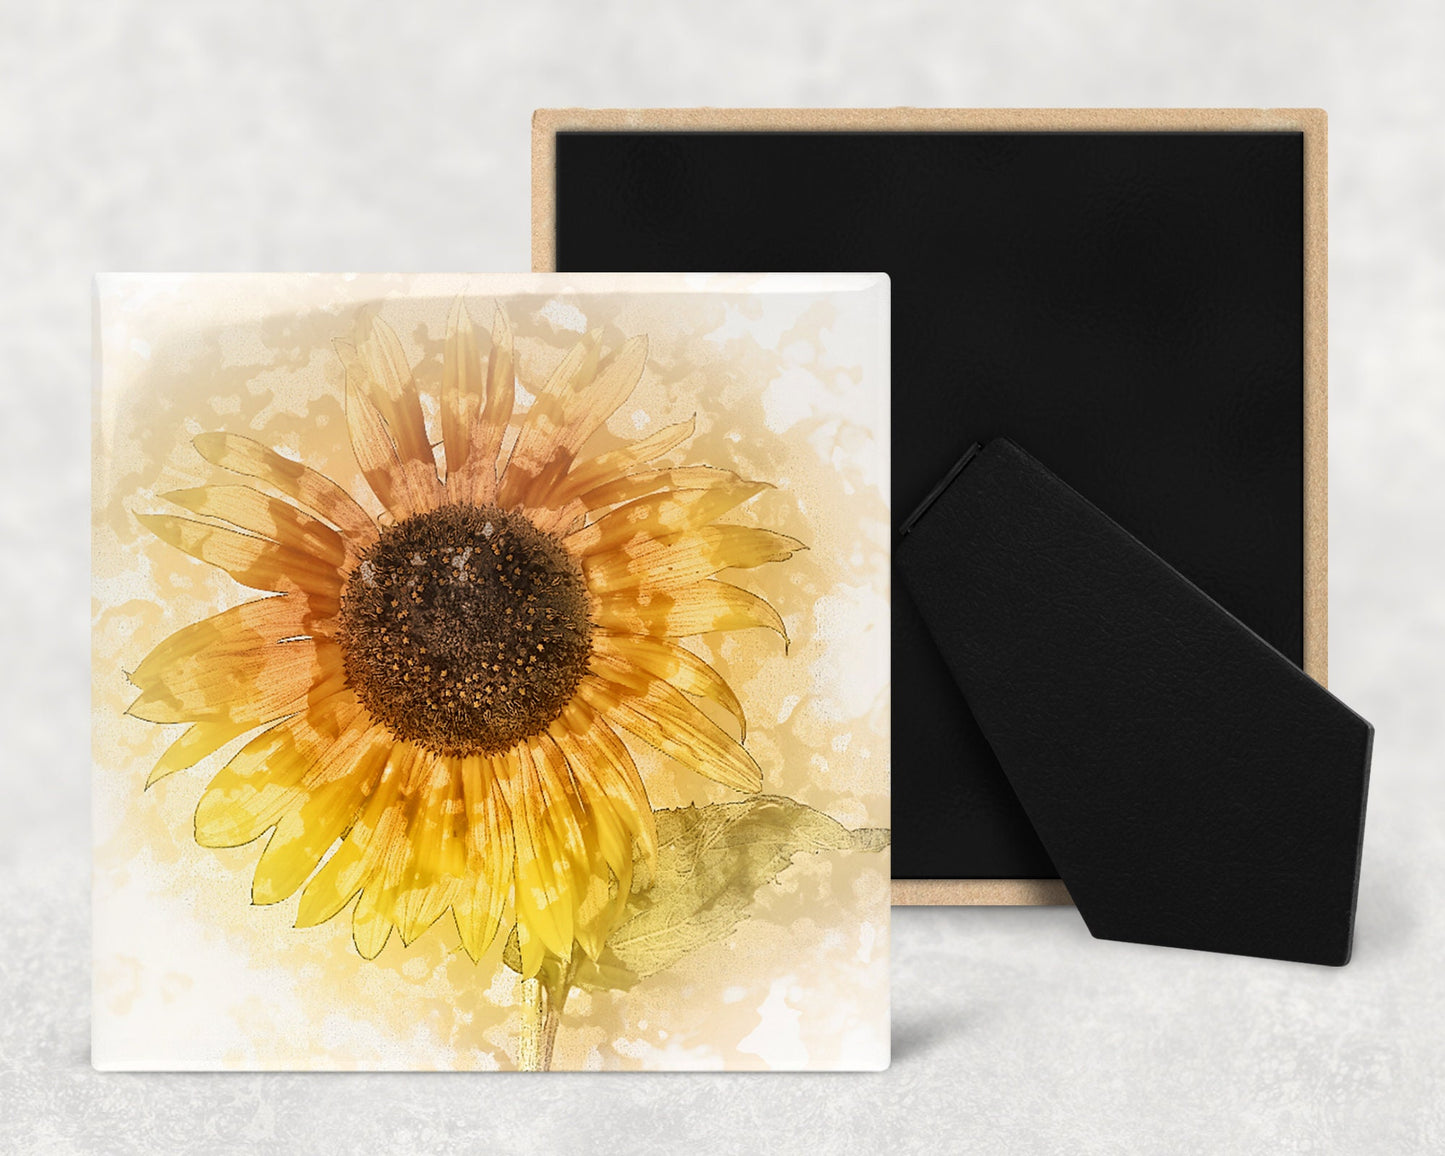 Watercolor Style Sunflower Art Decorative Ceramic Tile with Optional Easel Back - Available in 3 Sizes